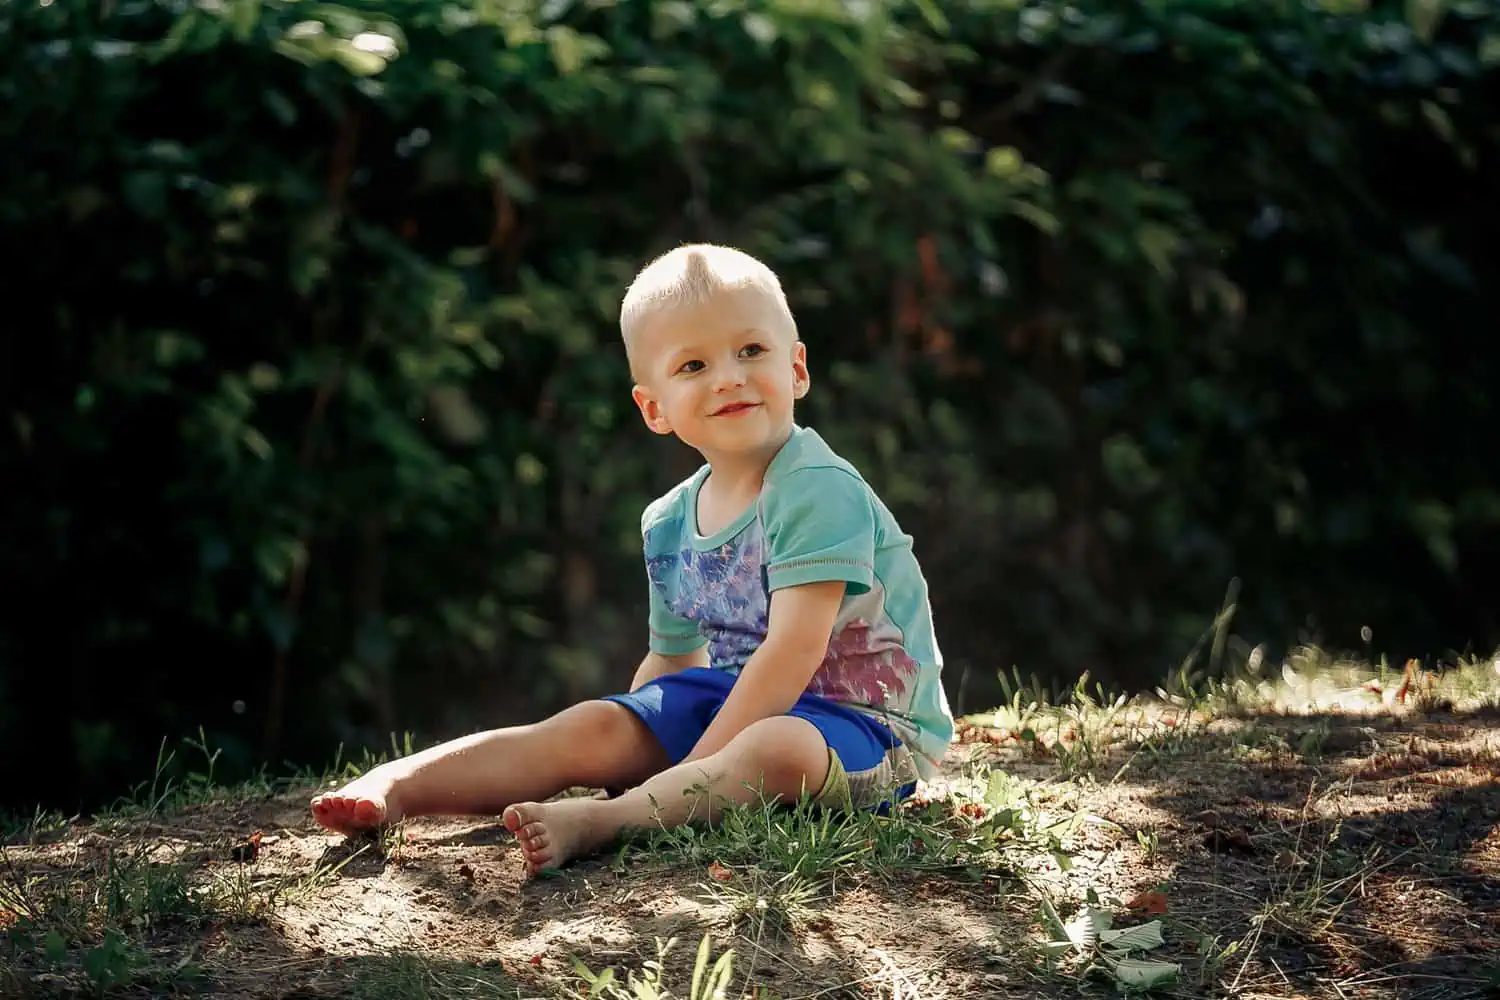 Barefoot adorable boy sitting on sand in the garden